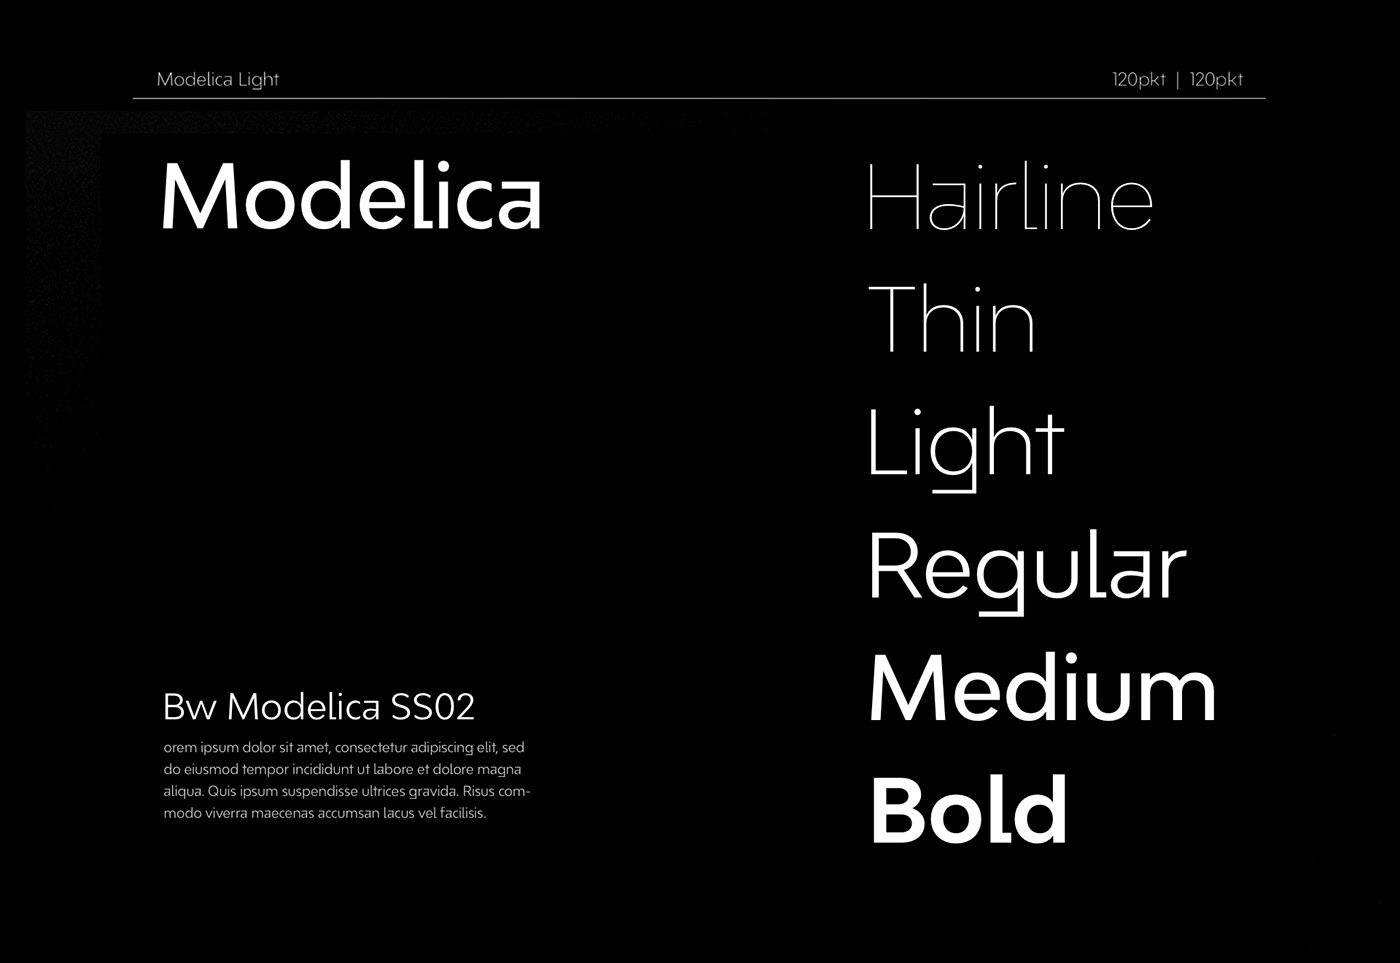  inception logotype was matched with Bw Modelica  a minimal, robust, reliable & pragmatic geometric 